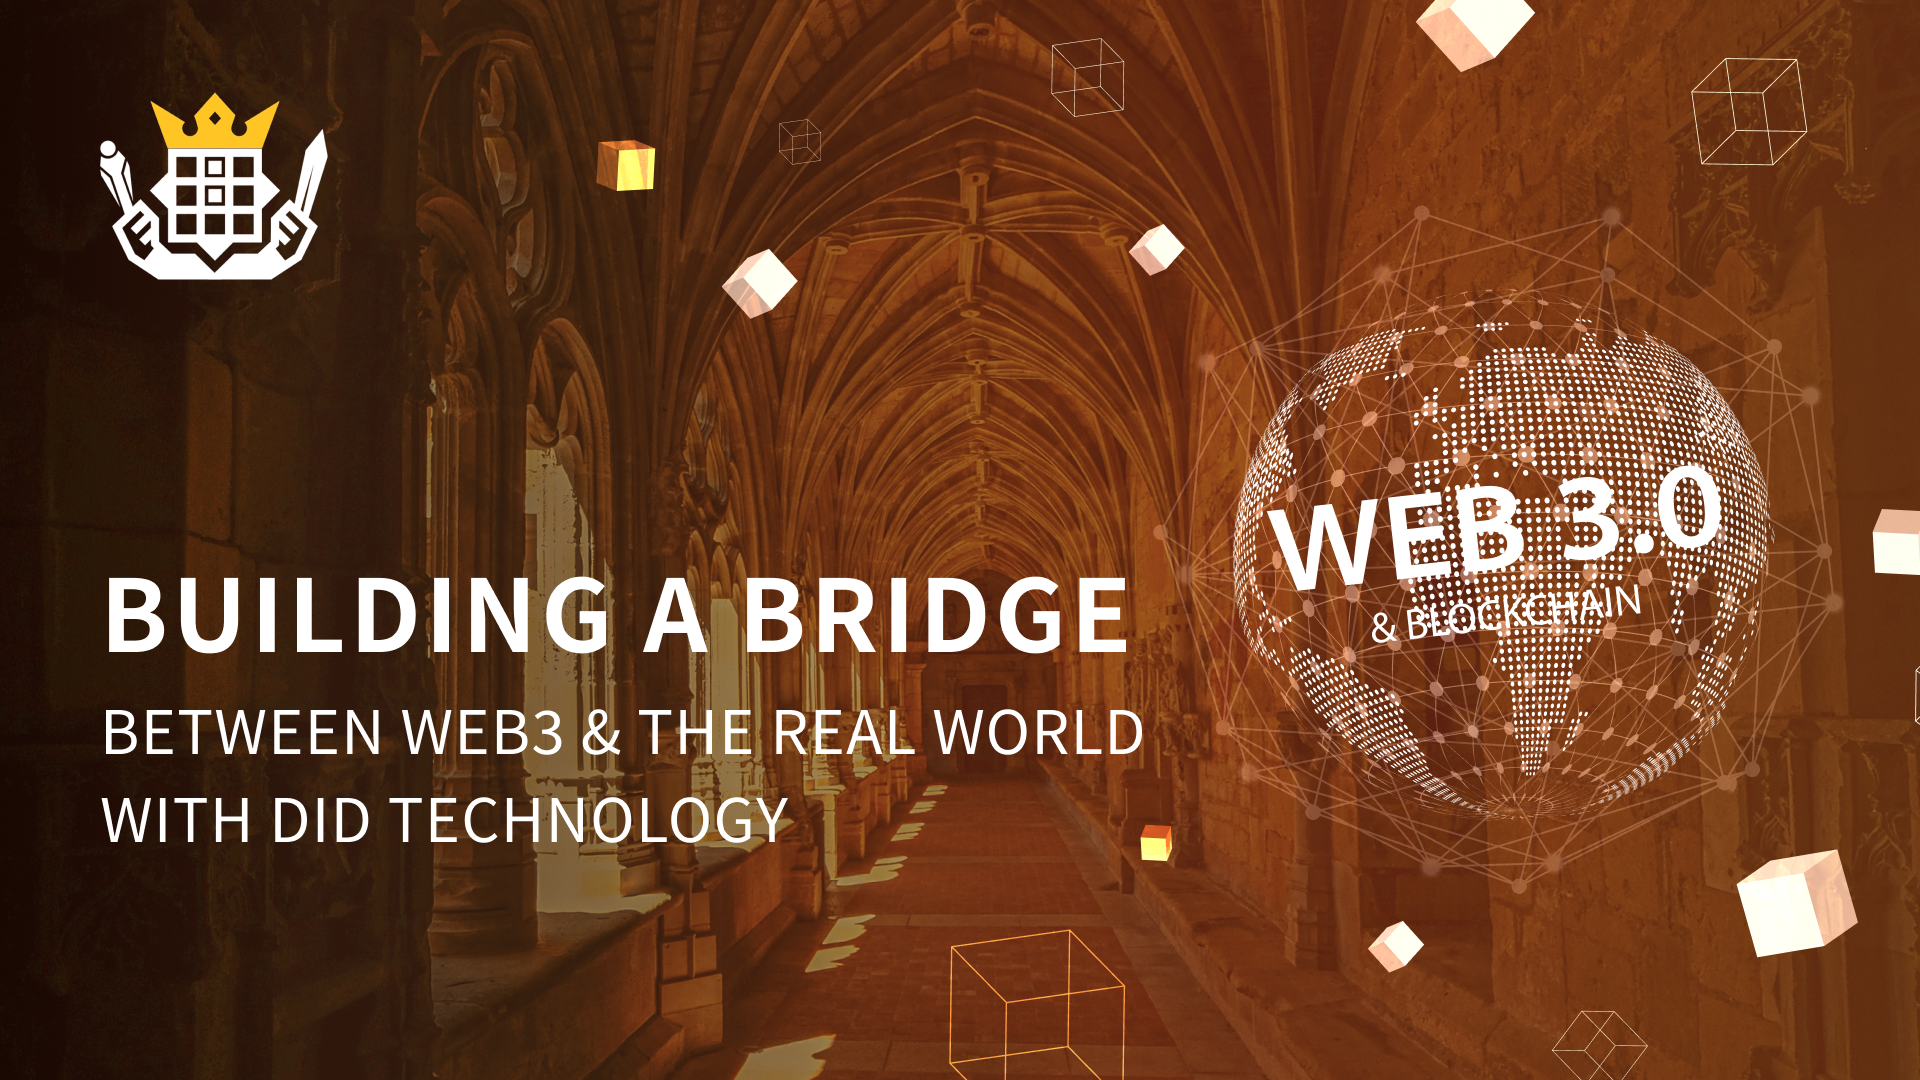 KingU丨Building a Bridge between Web3 and the Real World with DID Technology